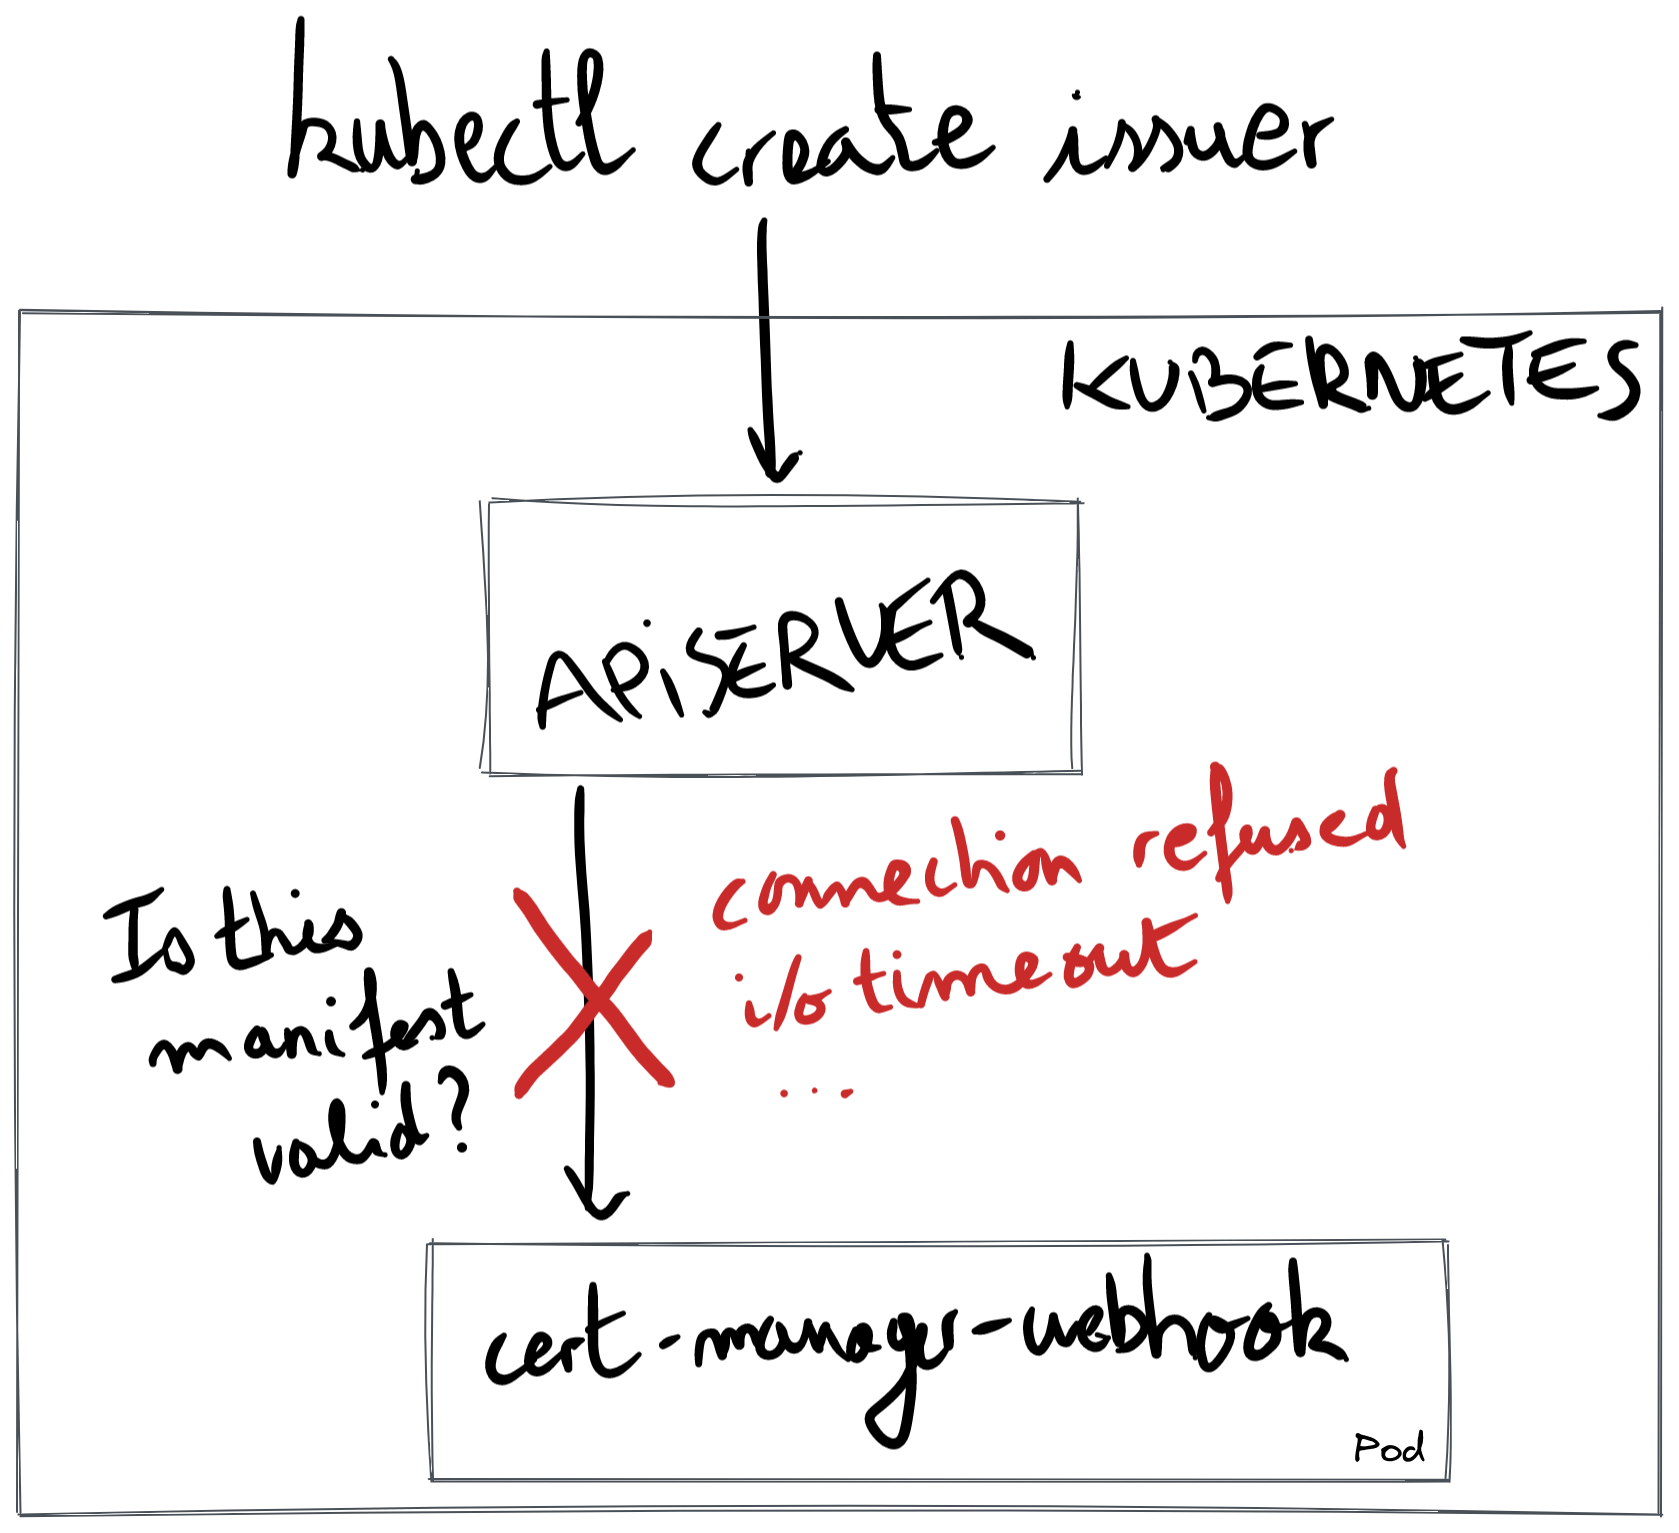 Diagram that shows a kubectl command that aims to create an issuer resource, and an arrow towards the Kubernetes API server, and an arrow between the API server and the webhook that indicates that the API server tries to connect to the webhook. This last arrow is crossed in red.